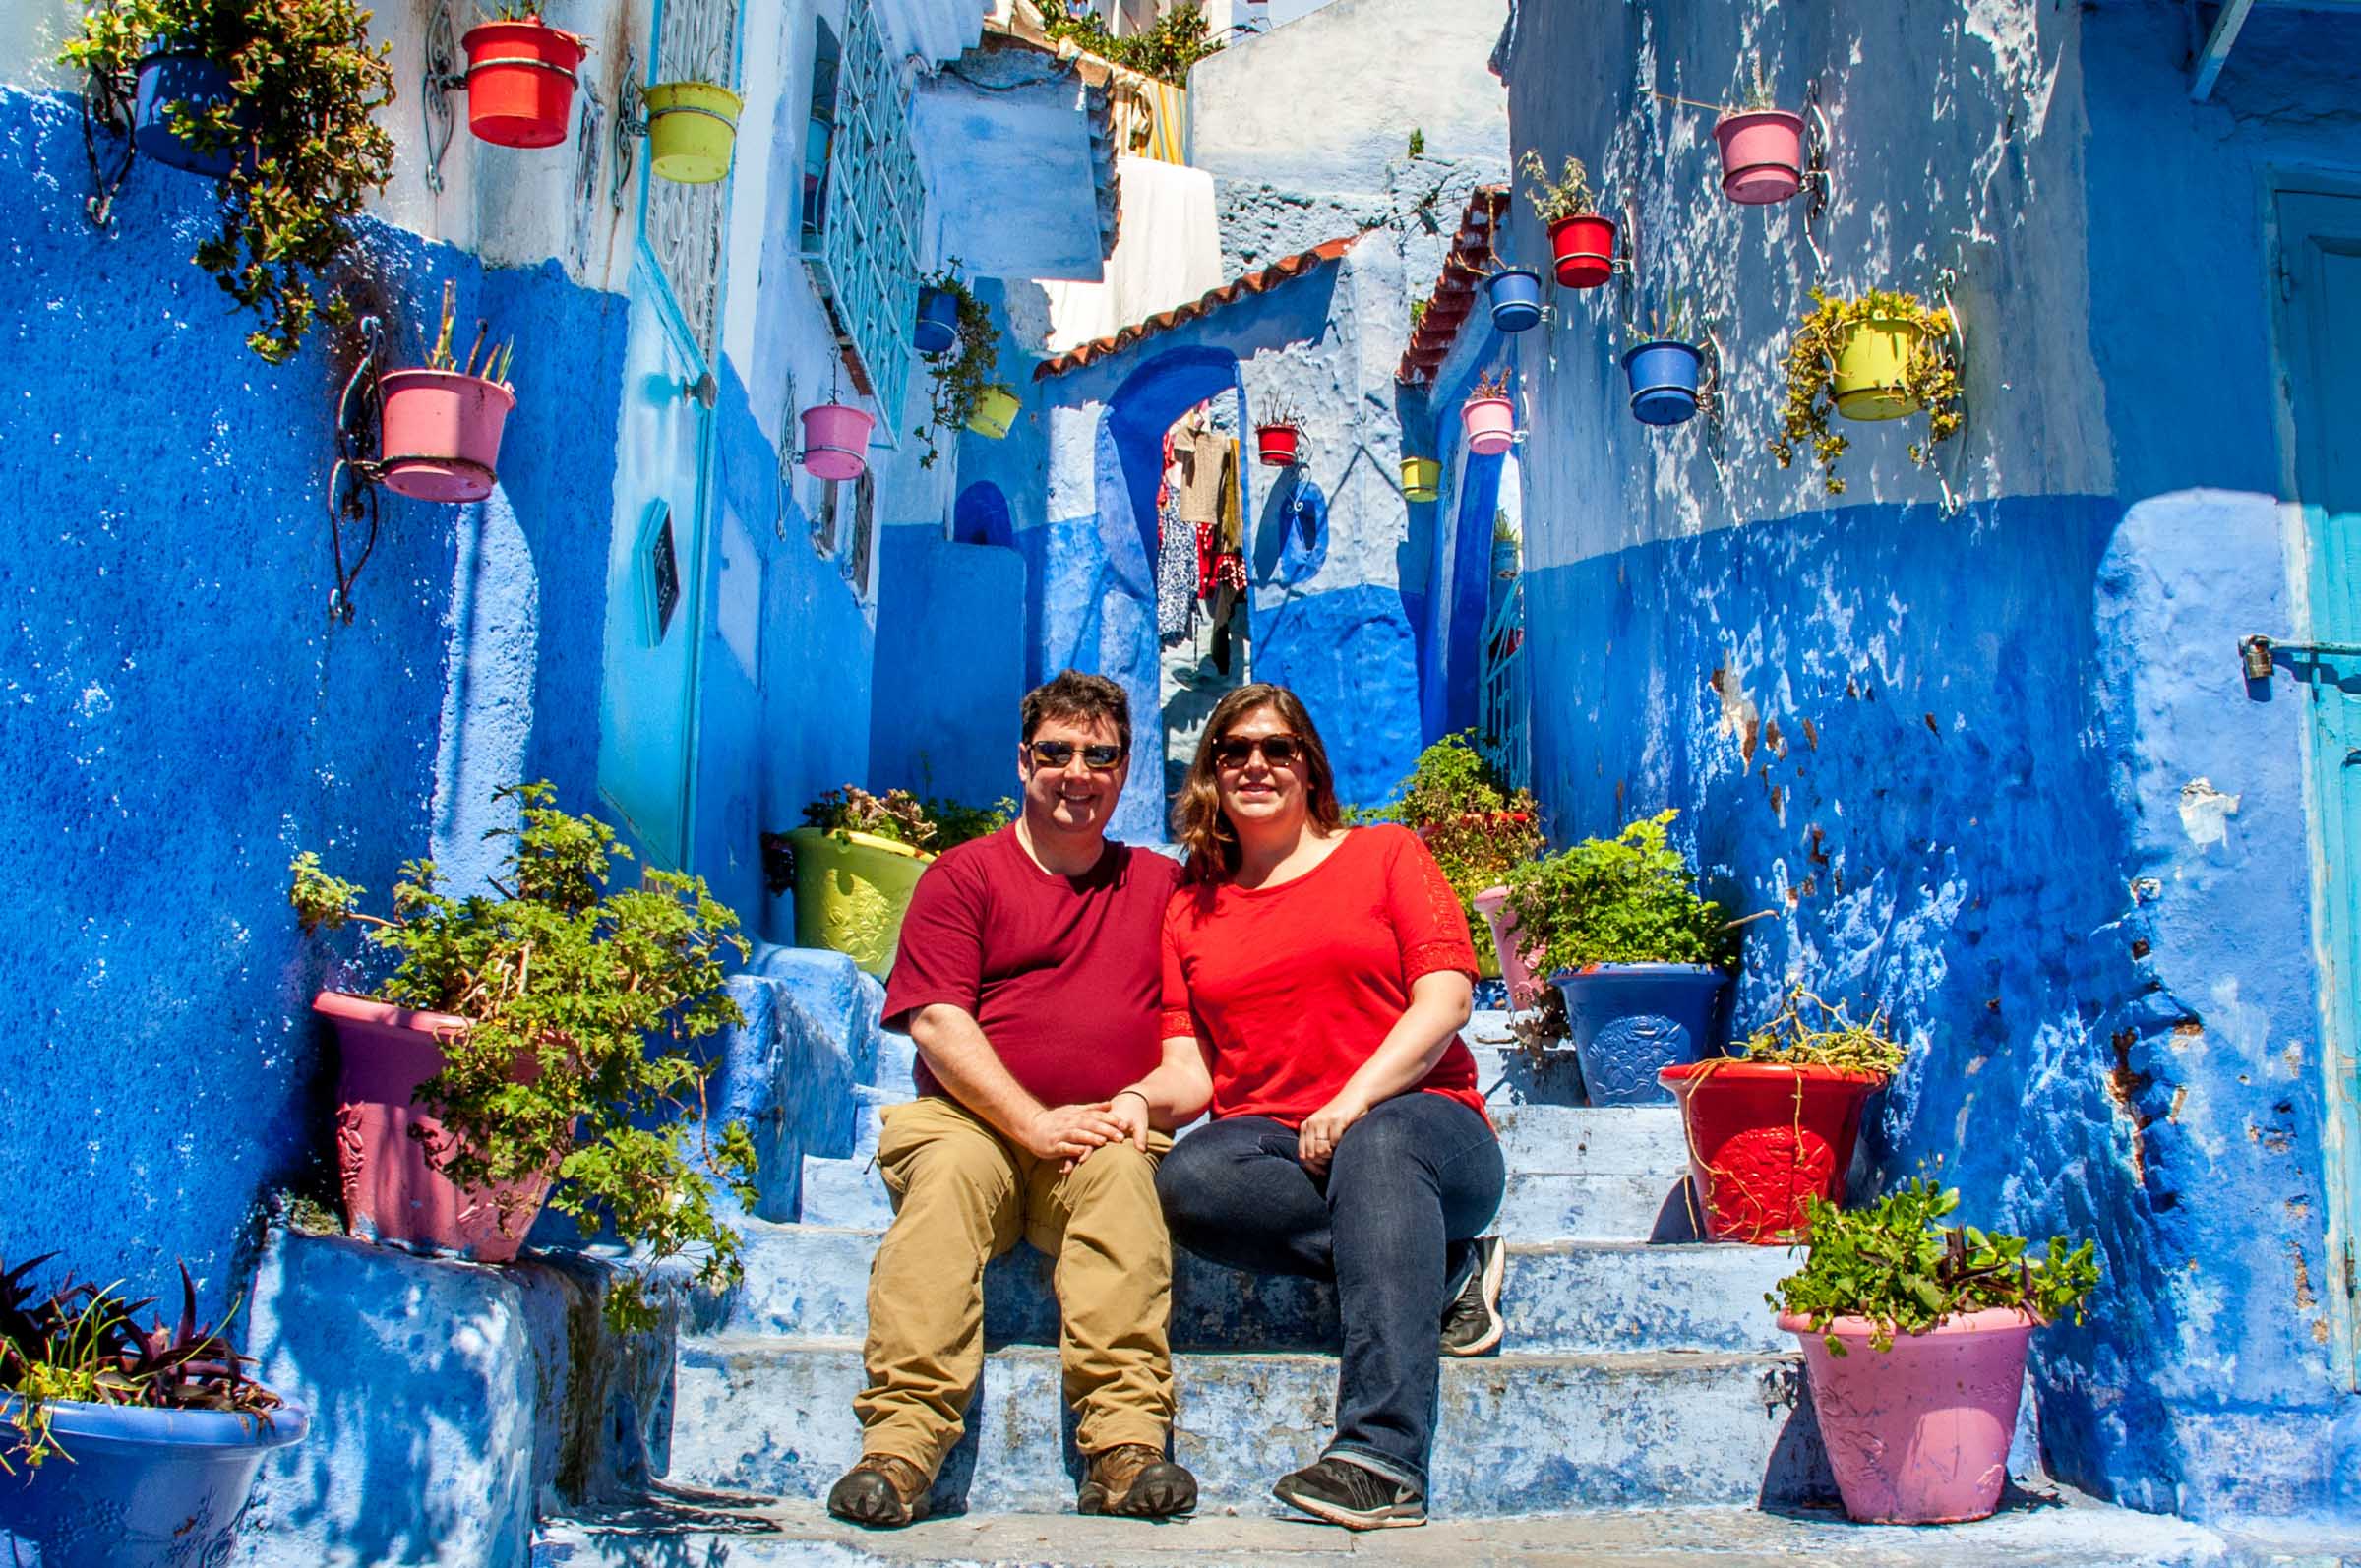 Lance and Laura, the Travel Addicts, in Chefchaouen, Morocco